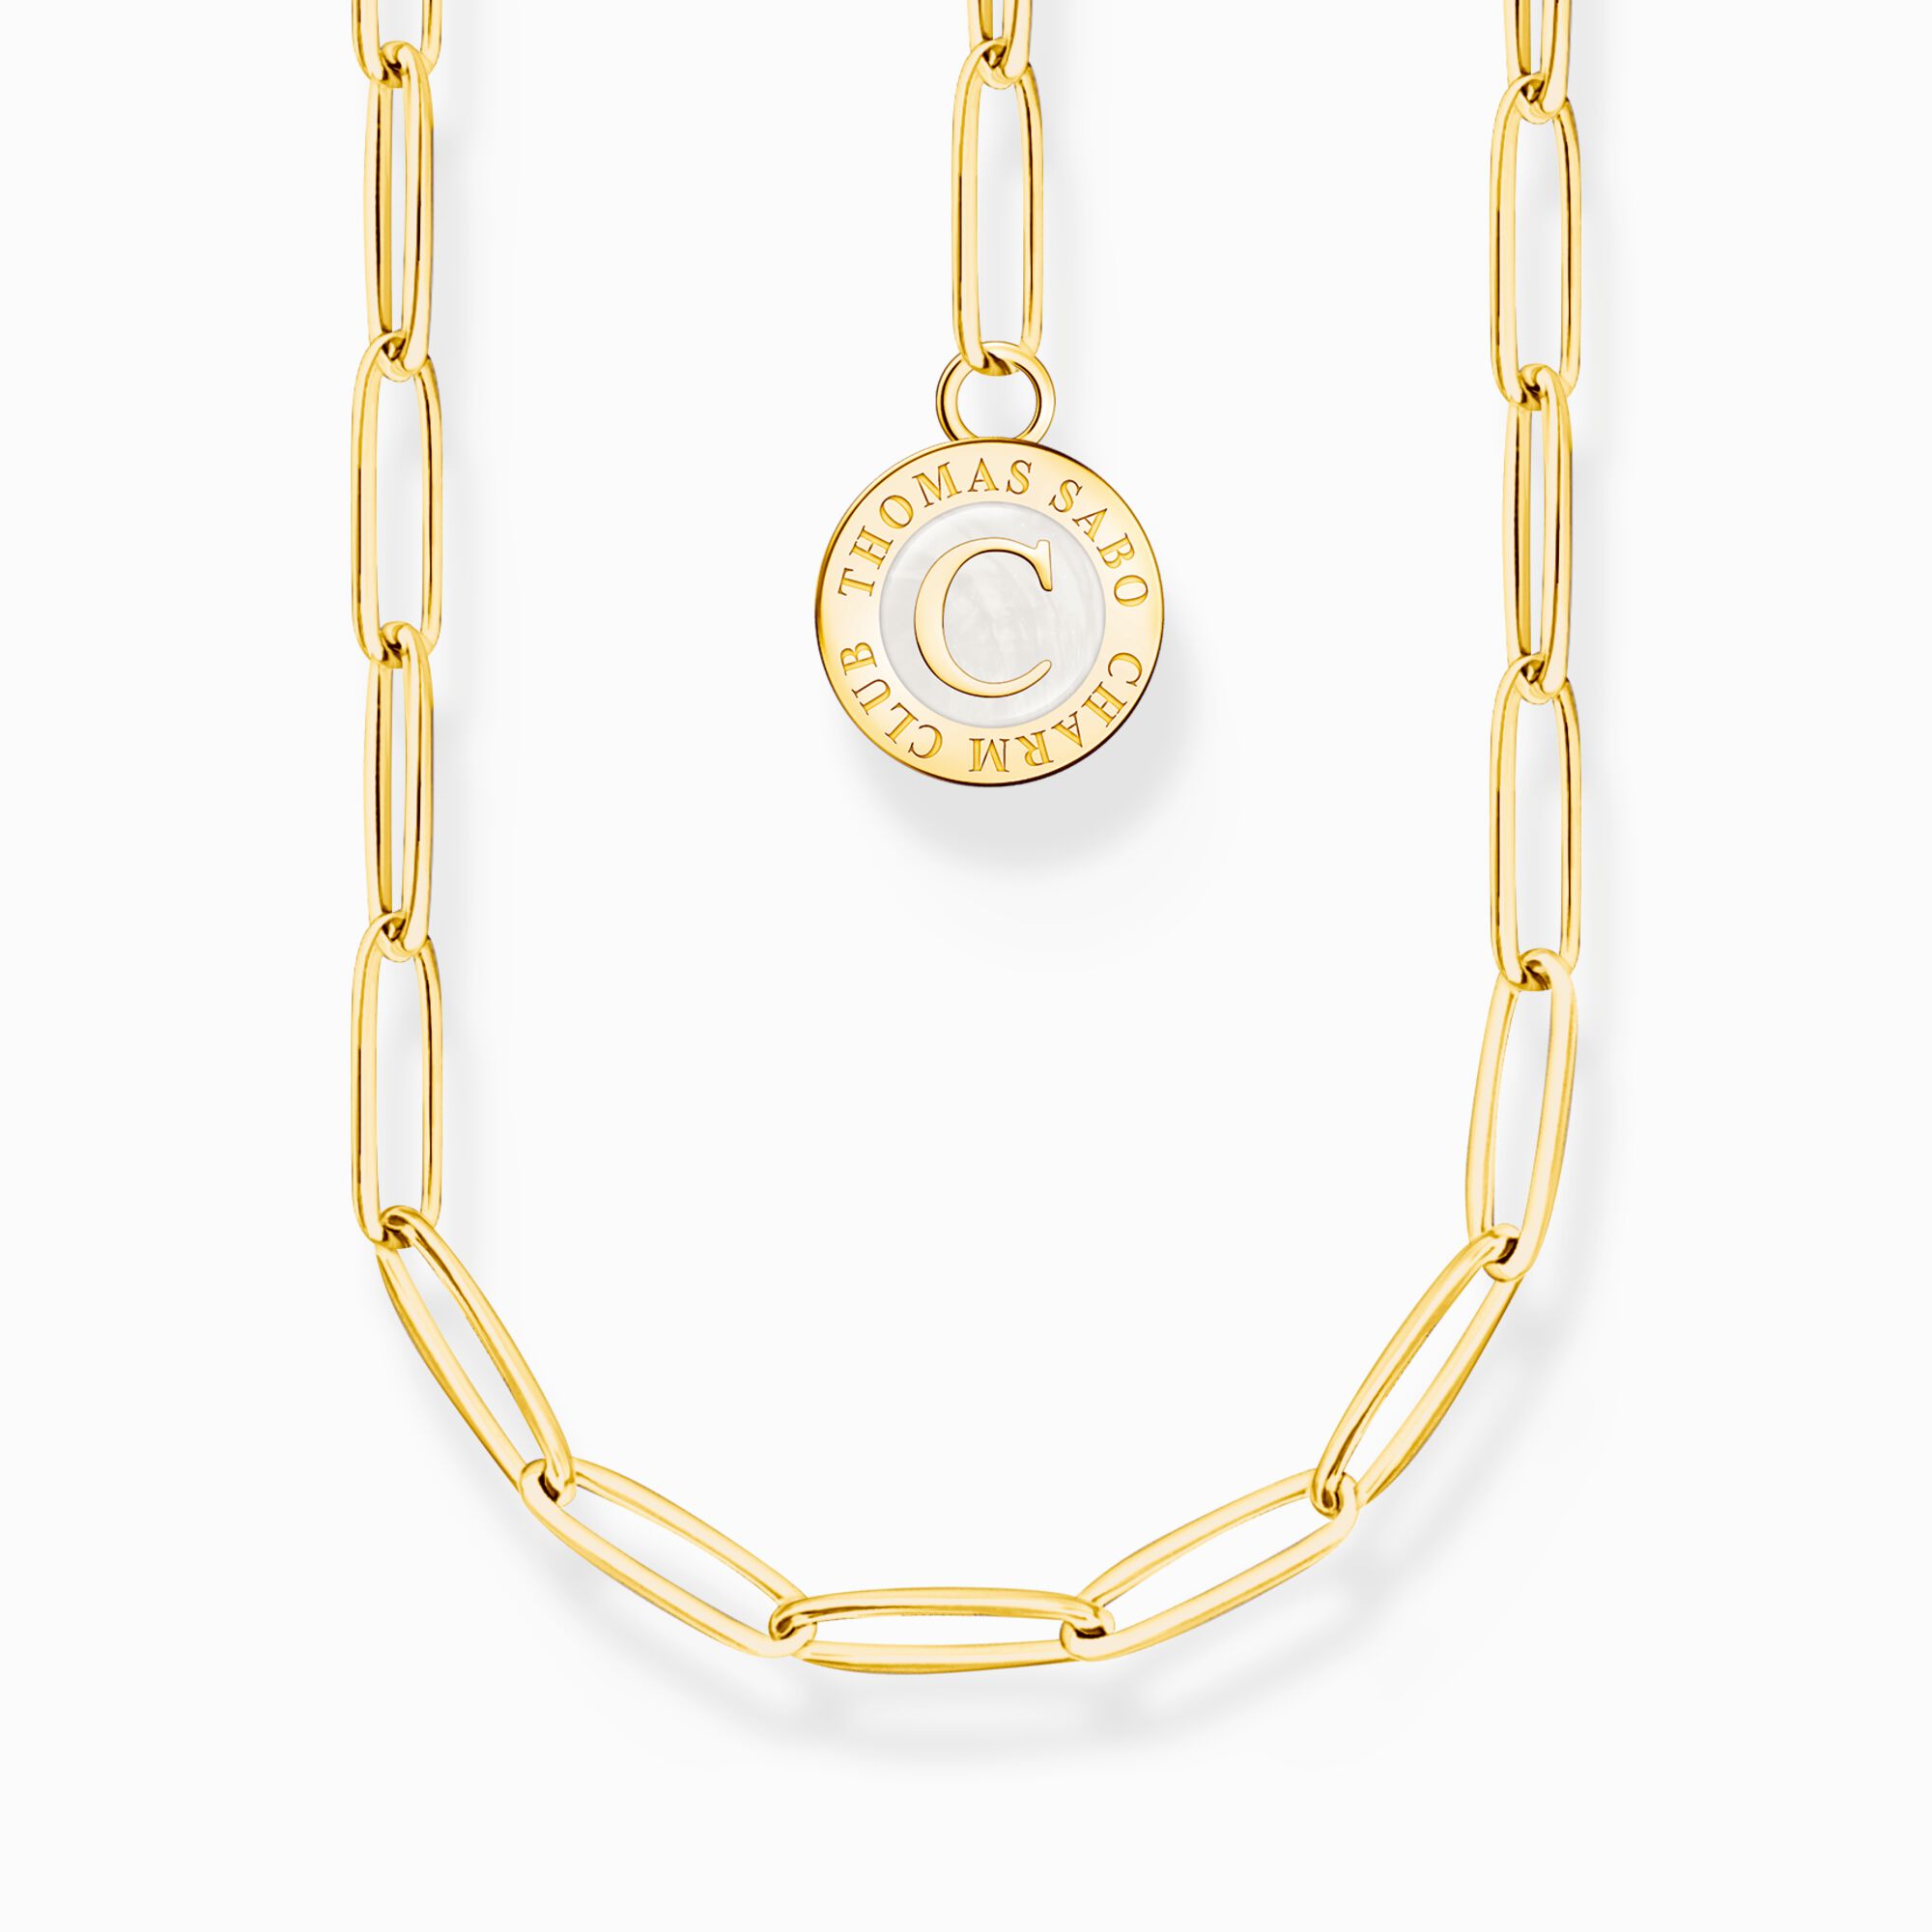 Member Charm necklace with white Charmista disc gold plated from the Charm Club collection in the THOMAS SABO online store